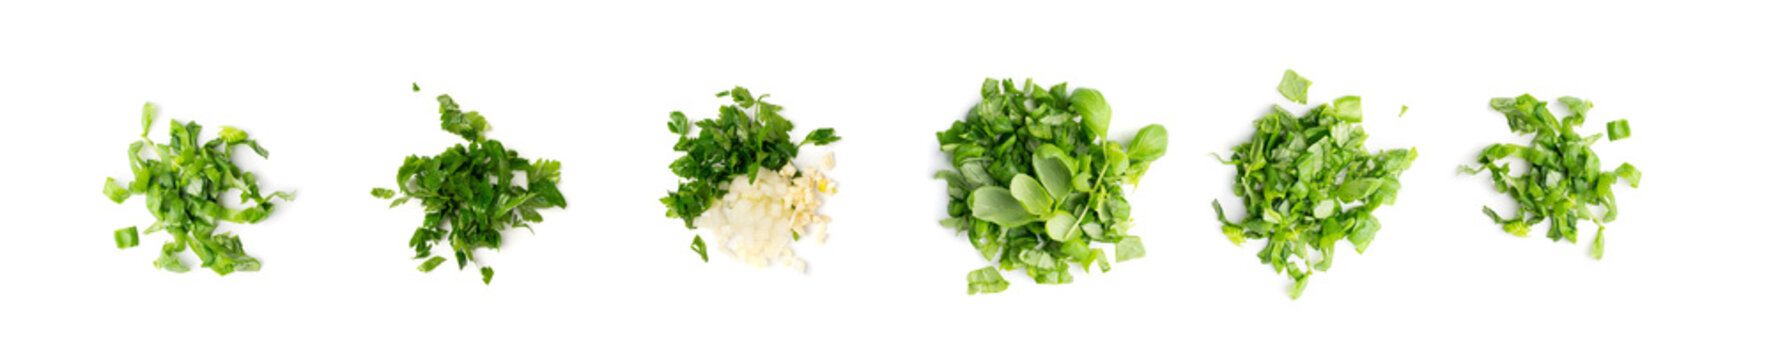 Chopped greens, garlic and parsley set isolated